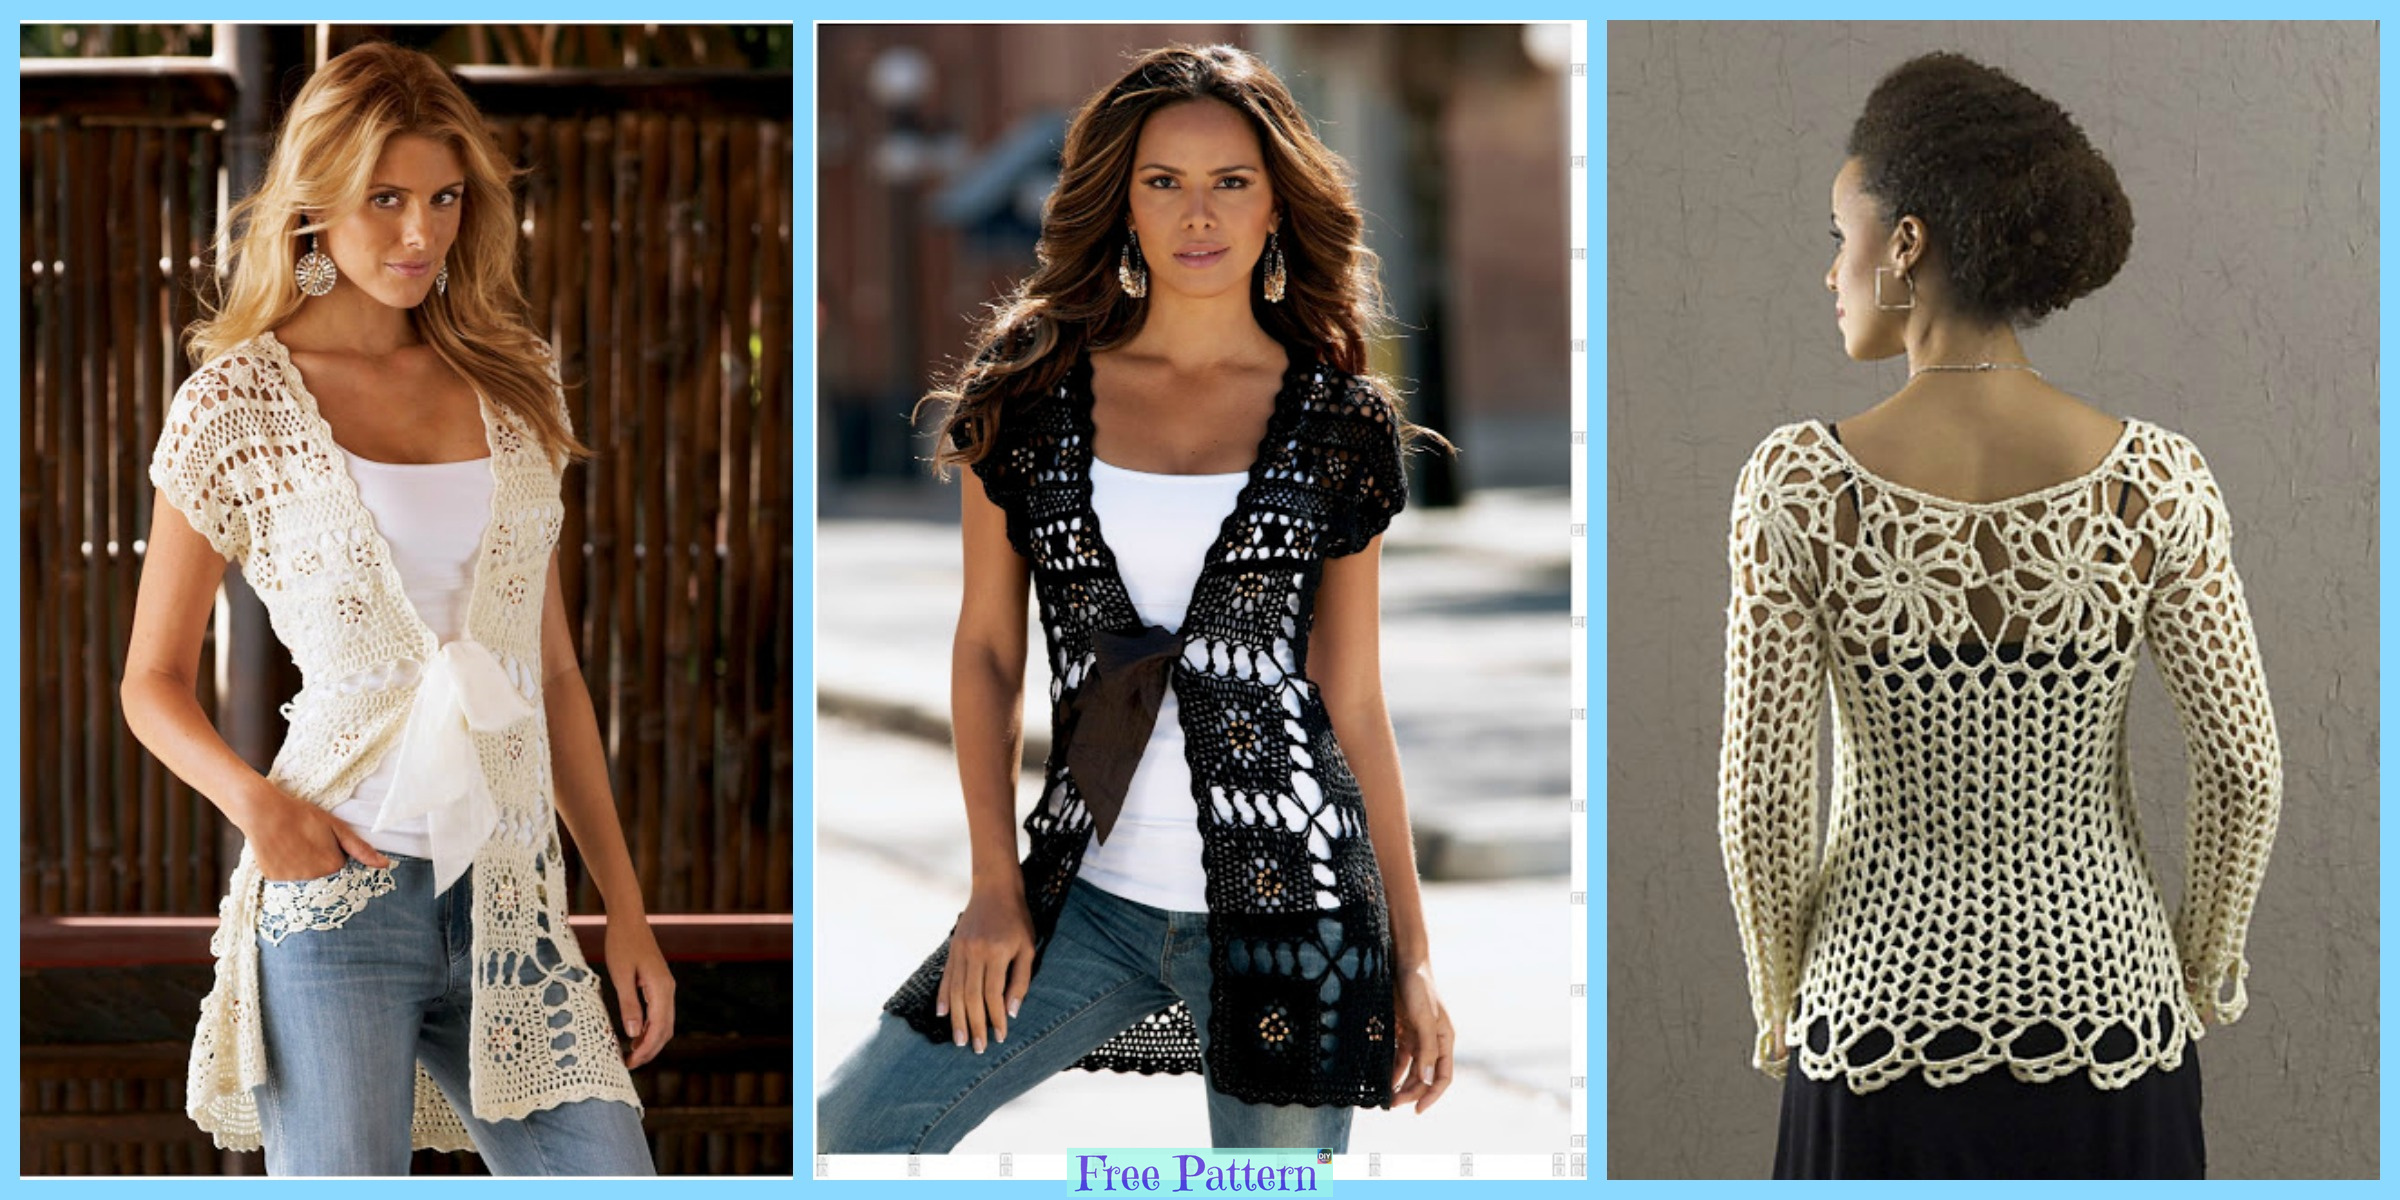 diy4ever-Crochet Lace Summer Tops - Free Patterns